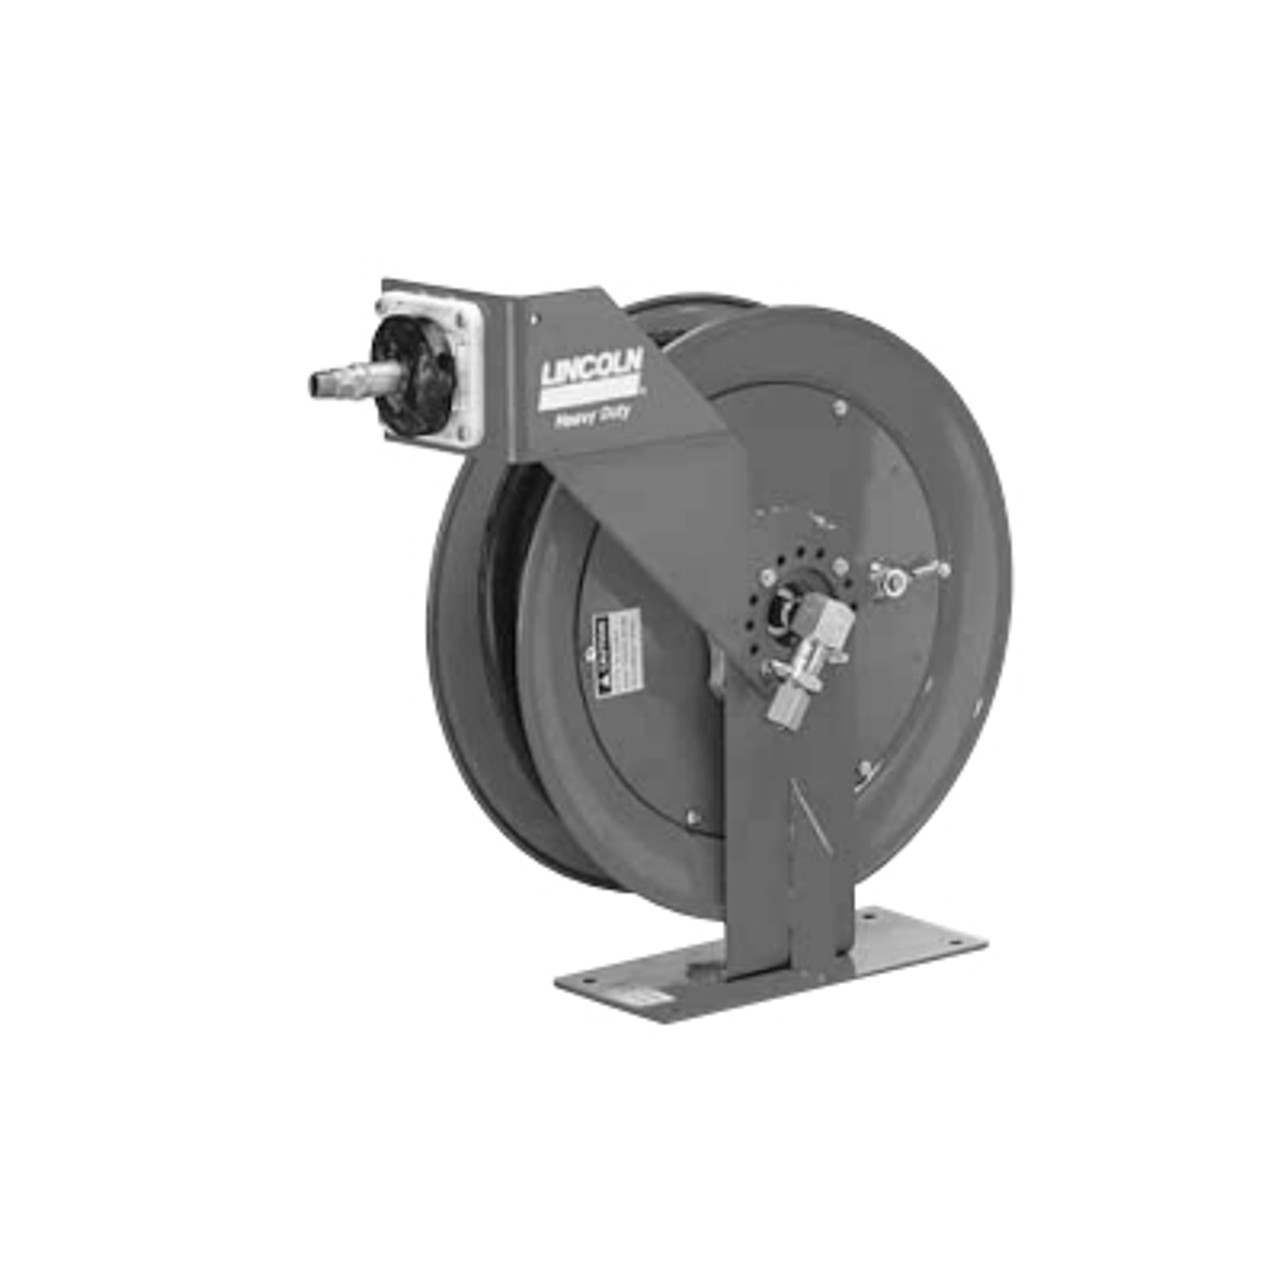 Lincoln Heavy-Duty Medium Pressure Reel Assembly with Less Hose End Control  50 ft. with 1/2 in. Hose Diameter - 83464-50